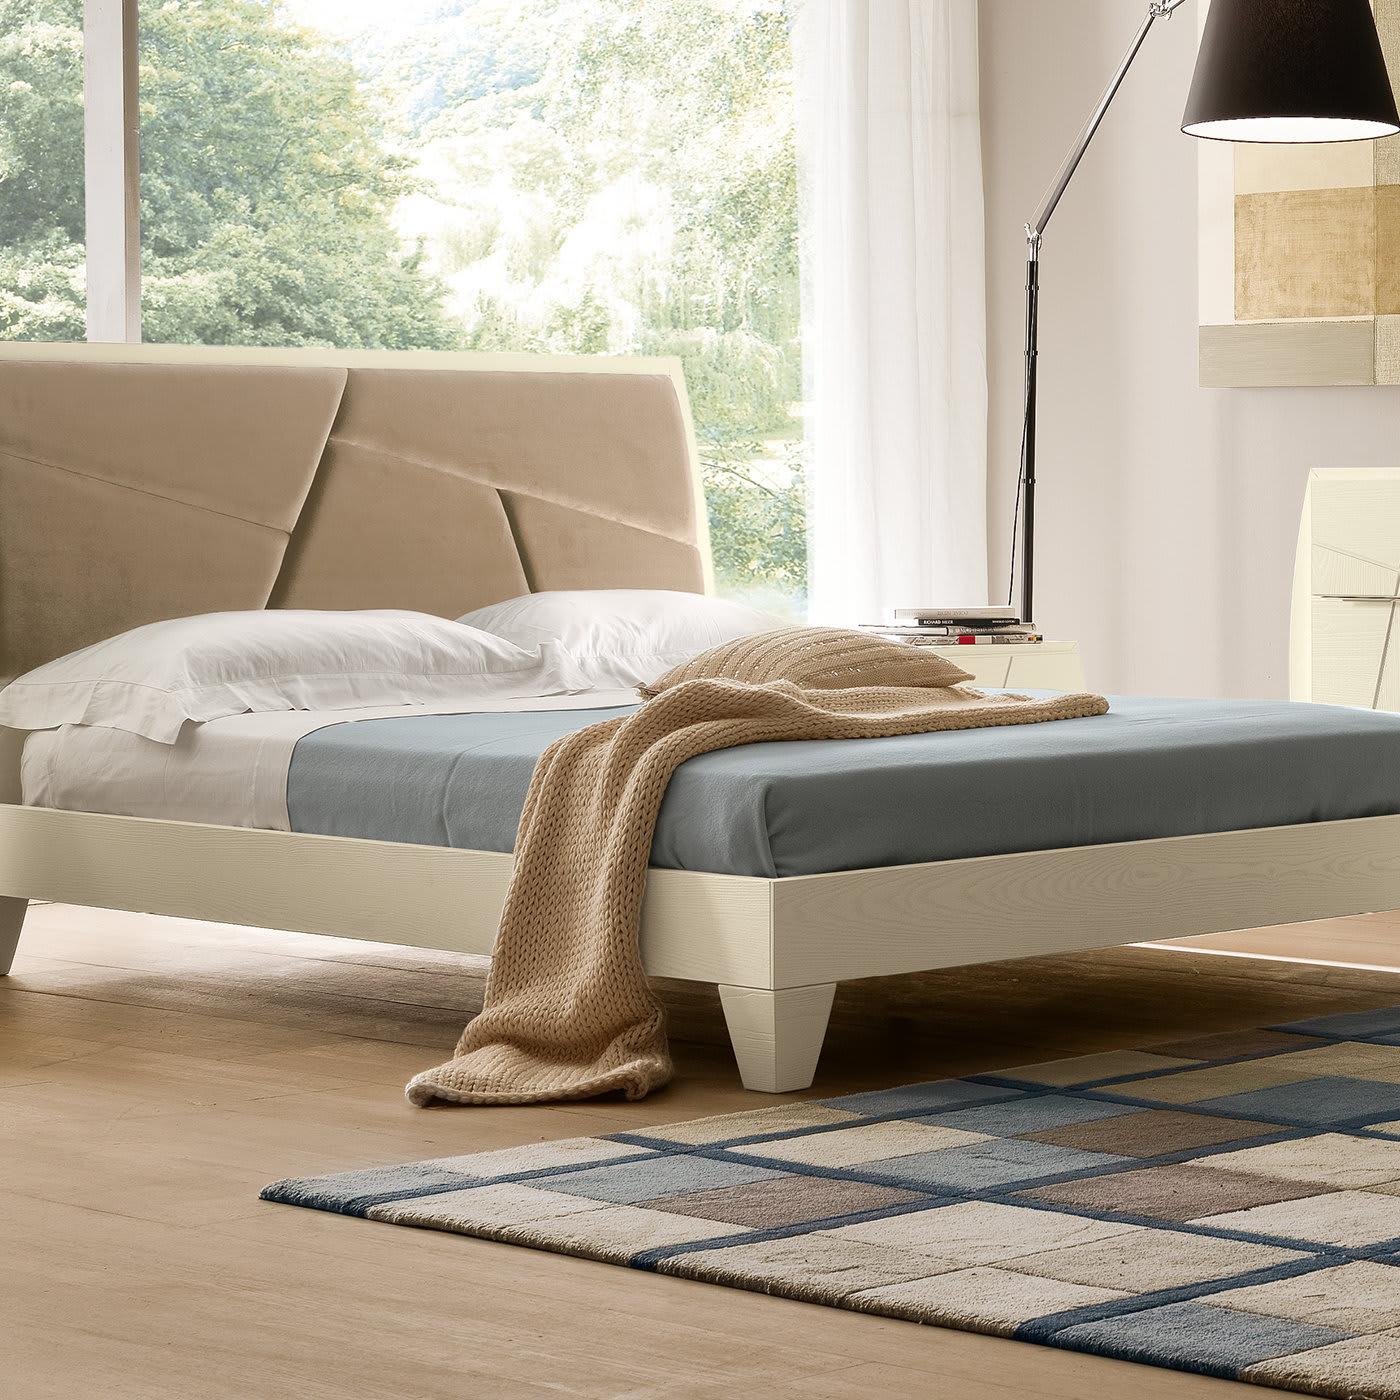 A standard Italian king-sized bed, for mattresses measuring 160 by 200 centimeters, the Mondrian Bed is full contemporary Mediterranean luxury. On a low walnut frame, the bed is topped with an upholstered headboard with a geometric design. The bed